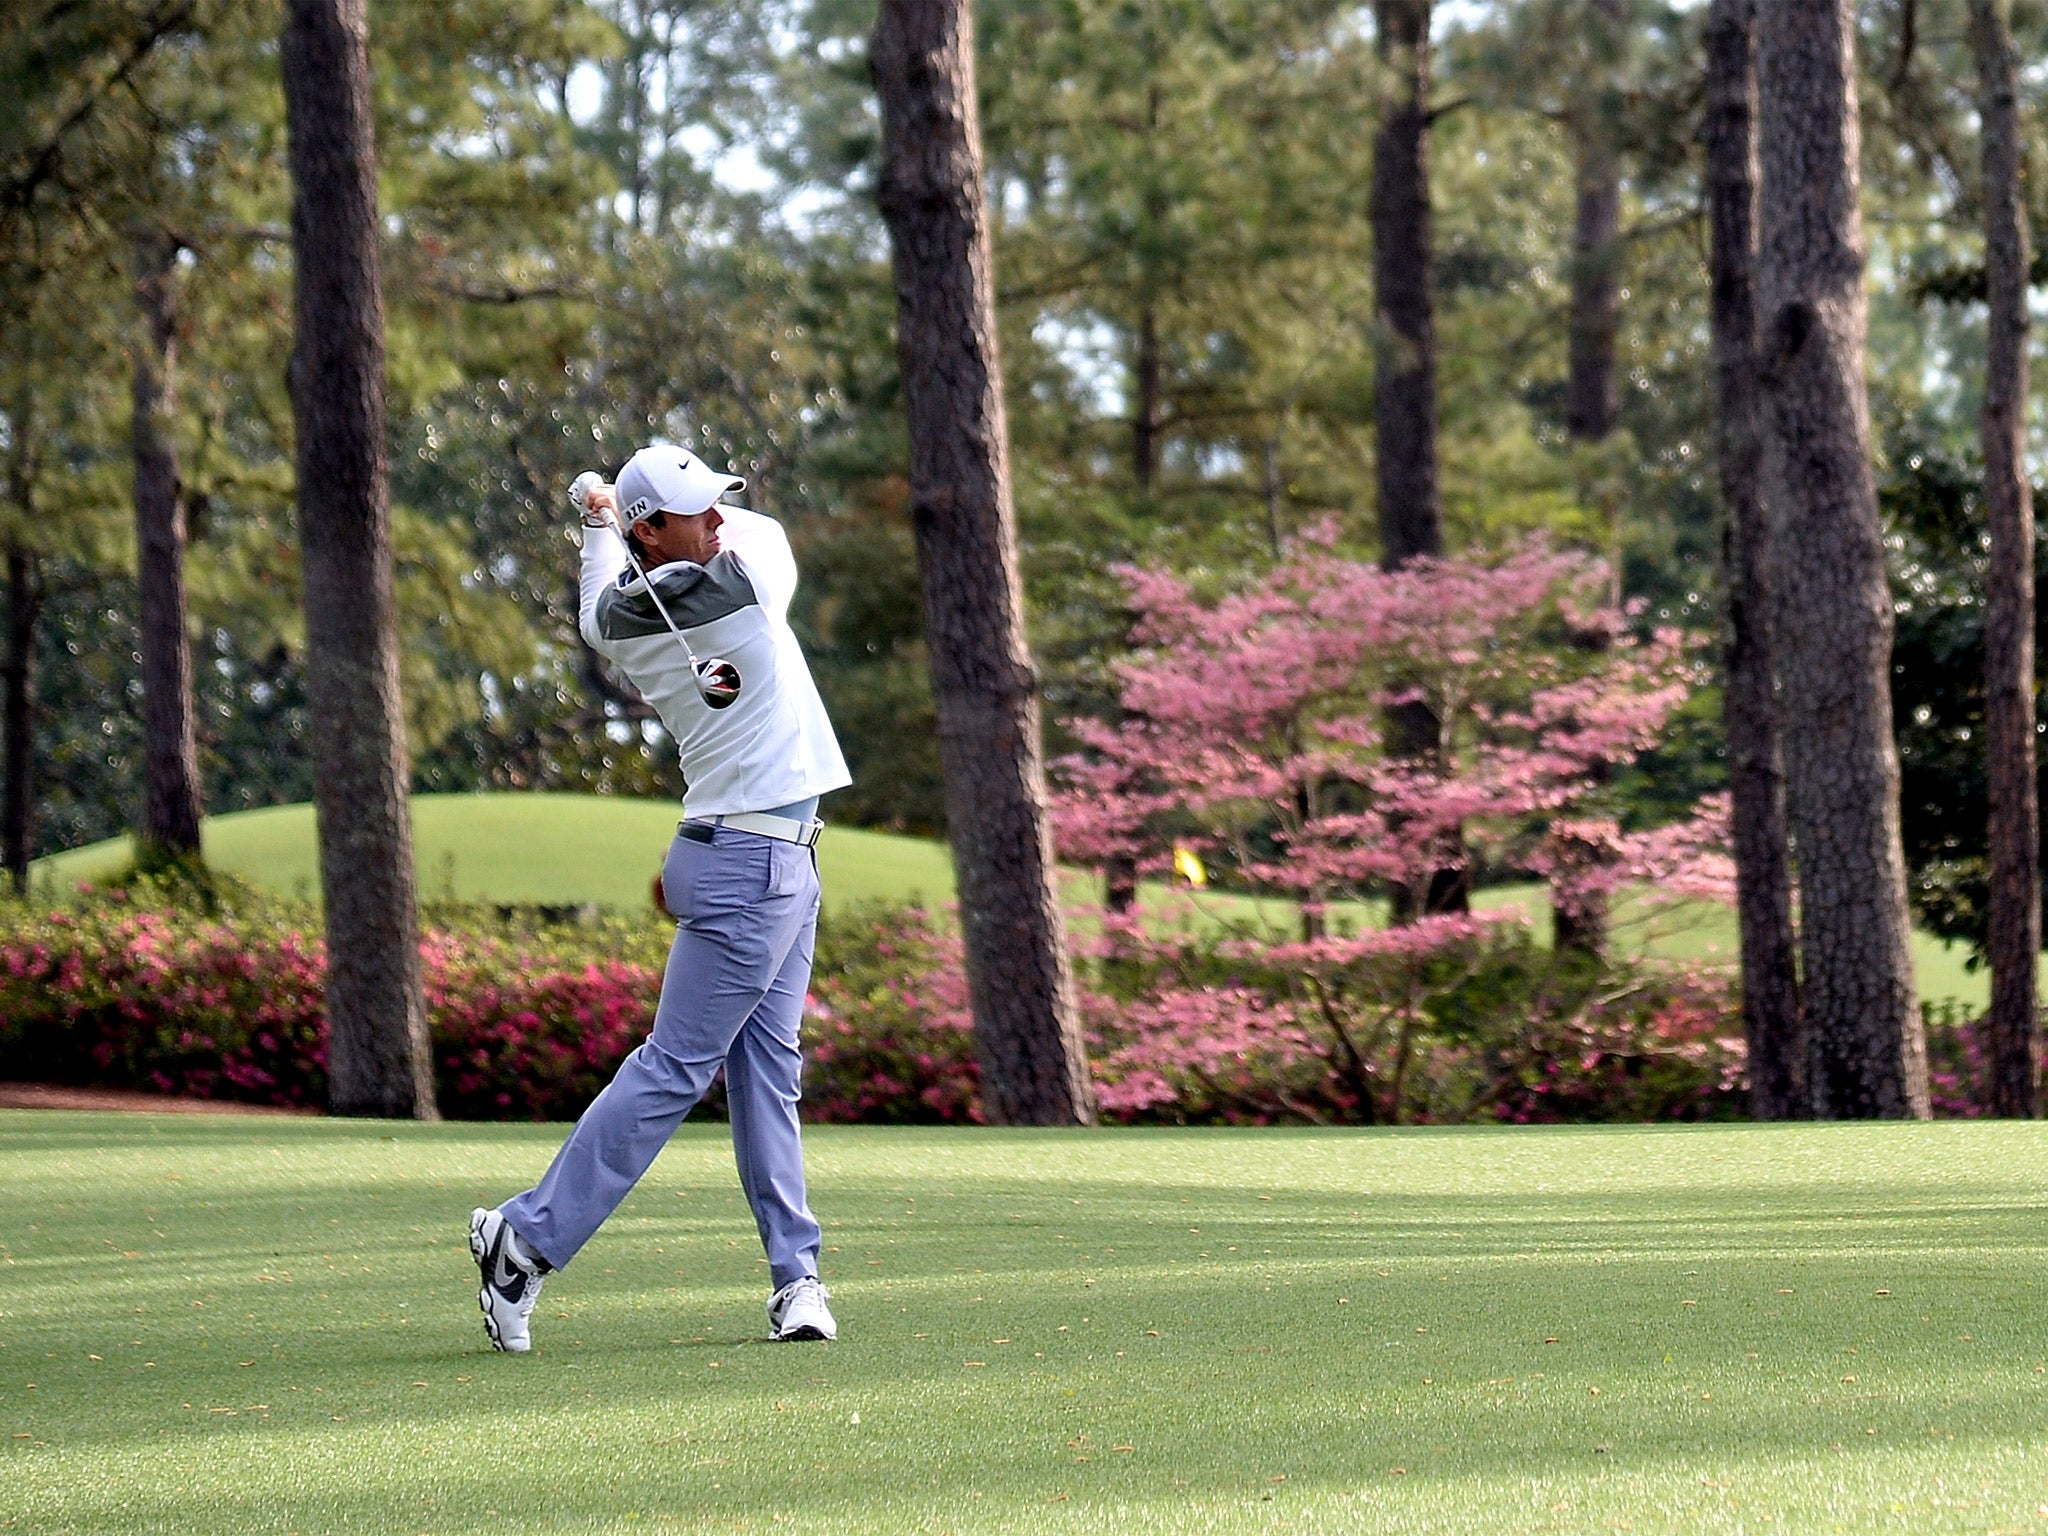 Rory McIlroy watches a drive during his practice round at Augusta